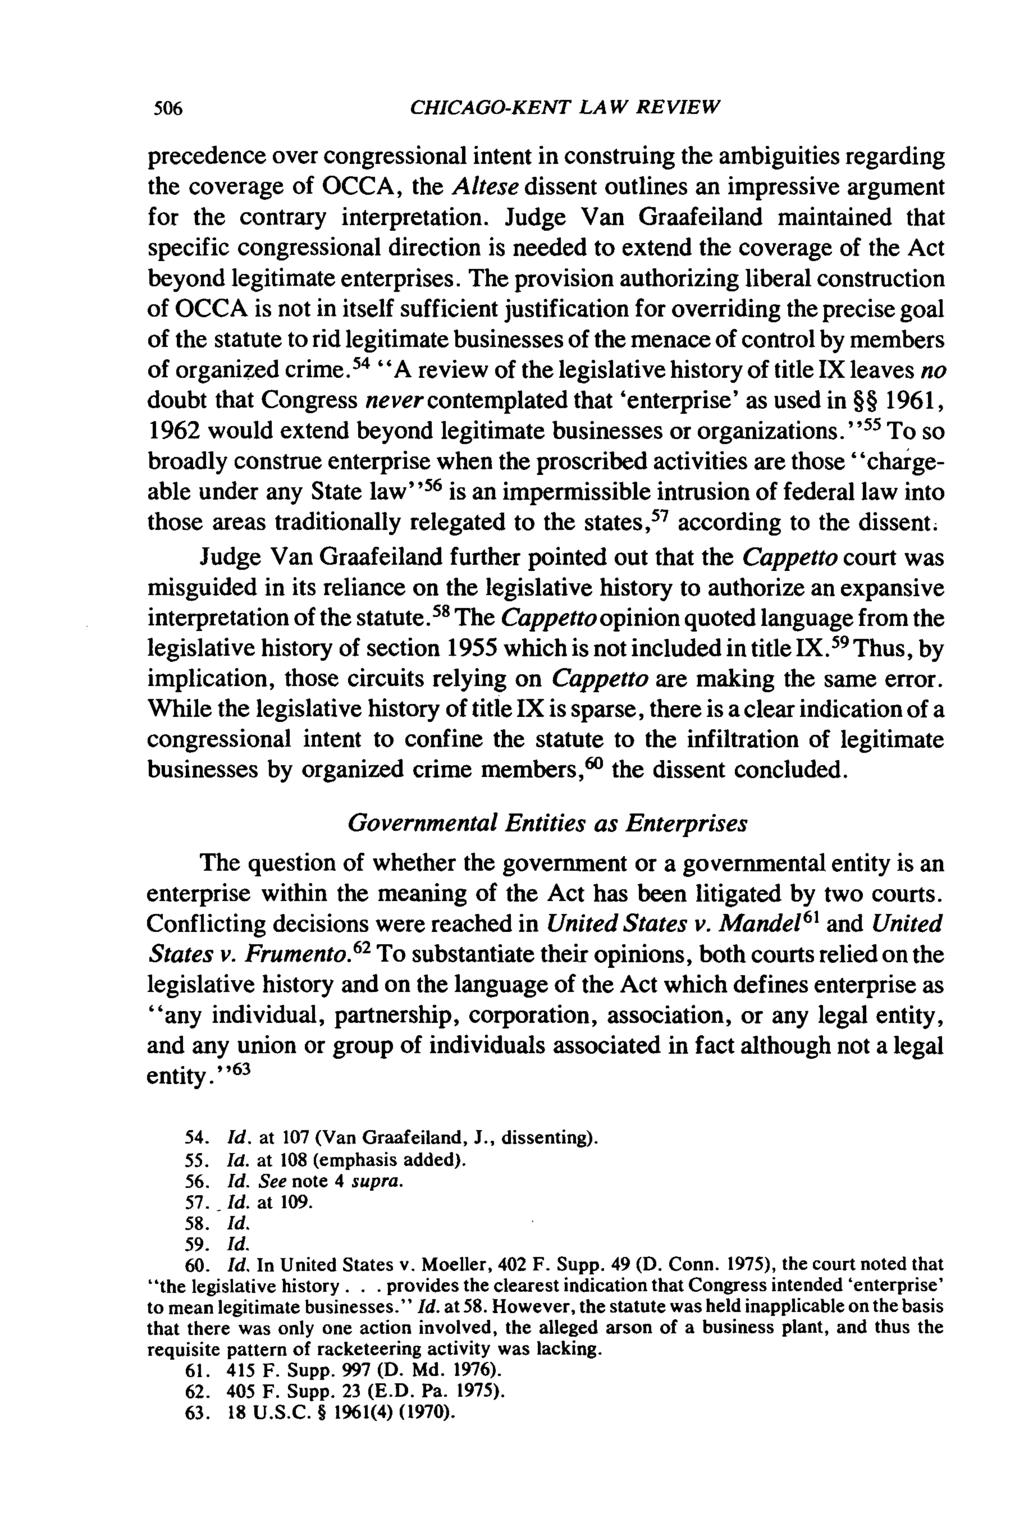 CHICAGO-KENT LAW REVIEW precedence over congressional intent in construing the ambiguities regarding the coverage of OCCA, the Altese dissent outlines an impressive argument for the contrary